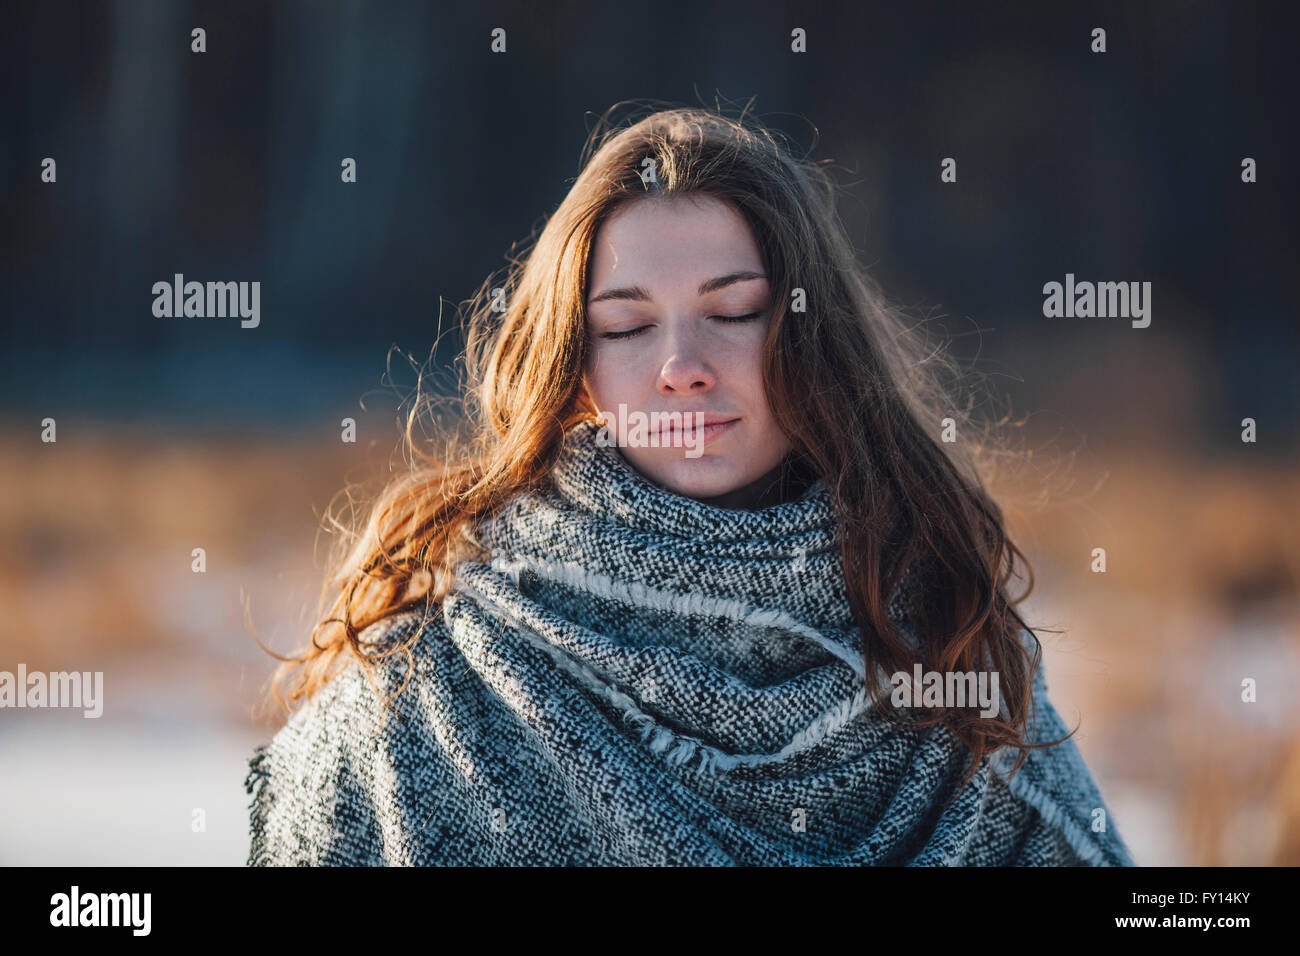 Close-up of woman with eyes closed standing outdoors Stock Photo